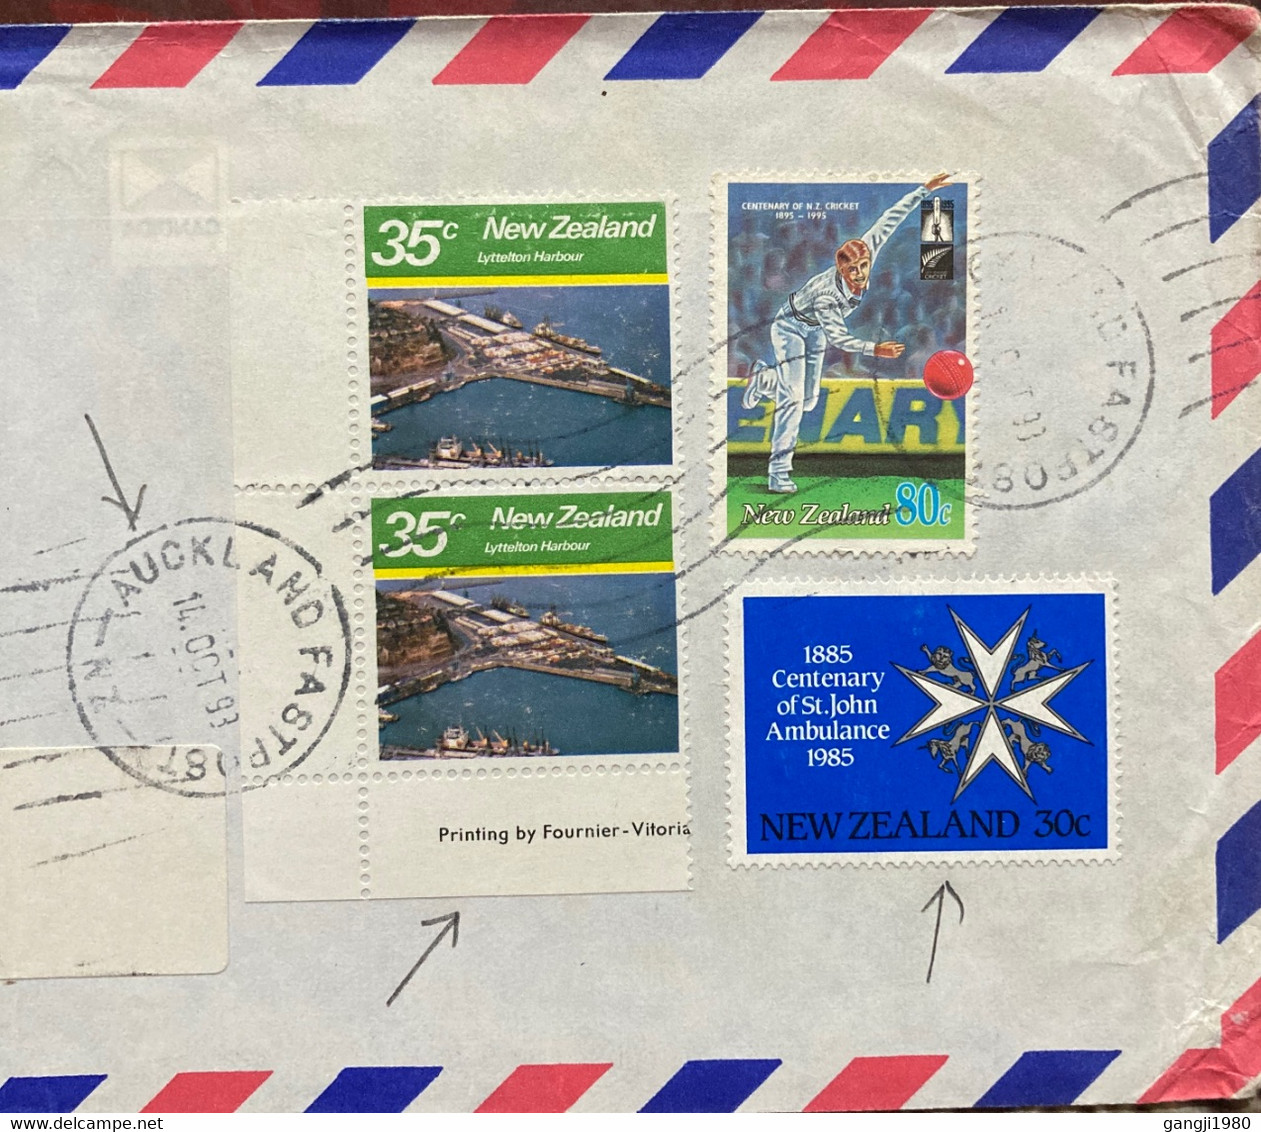 NEW ZEALAND 1985, CRICKET & AMBULANCE, HEALTH, MEDICAL, SPORT, LYTTELTON HARBOUR, AUCKLAND FAST POST CANCEL, COVER TO IN - Storia Postale